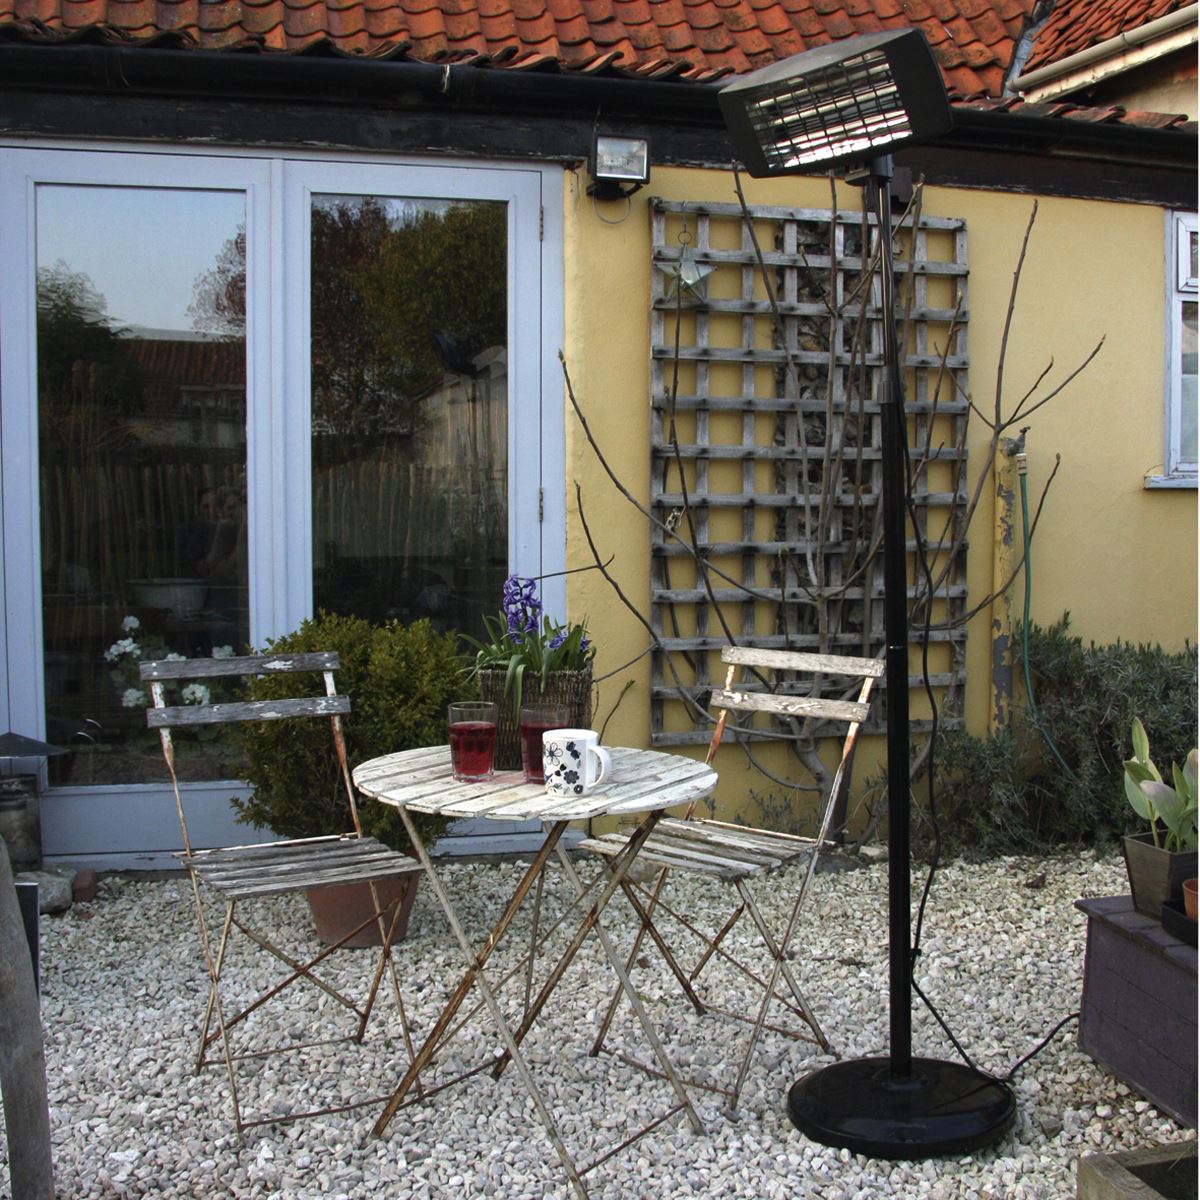 Sealey Infrared Quartz Patio Heater 2000W/230V with Telescopic Floor Stand